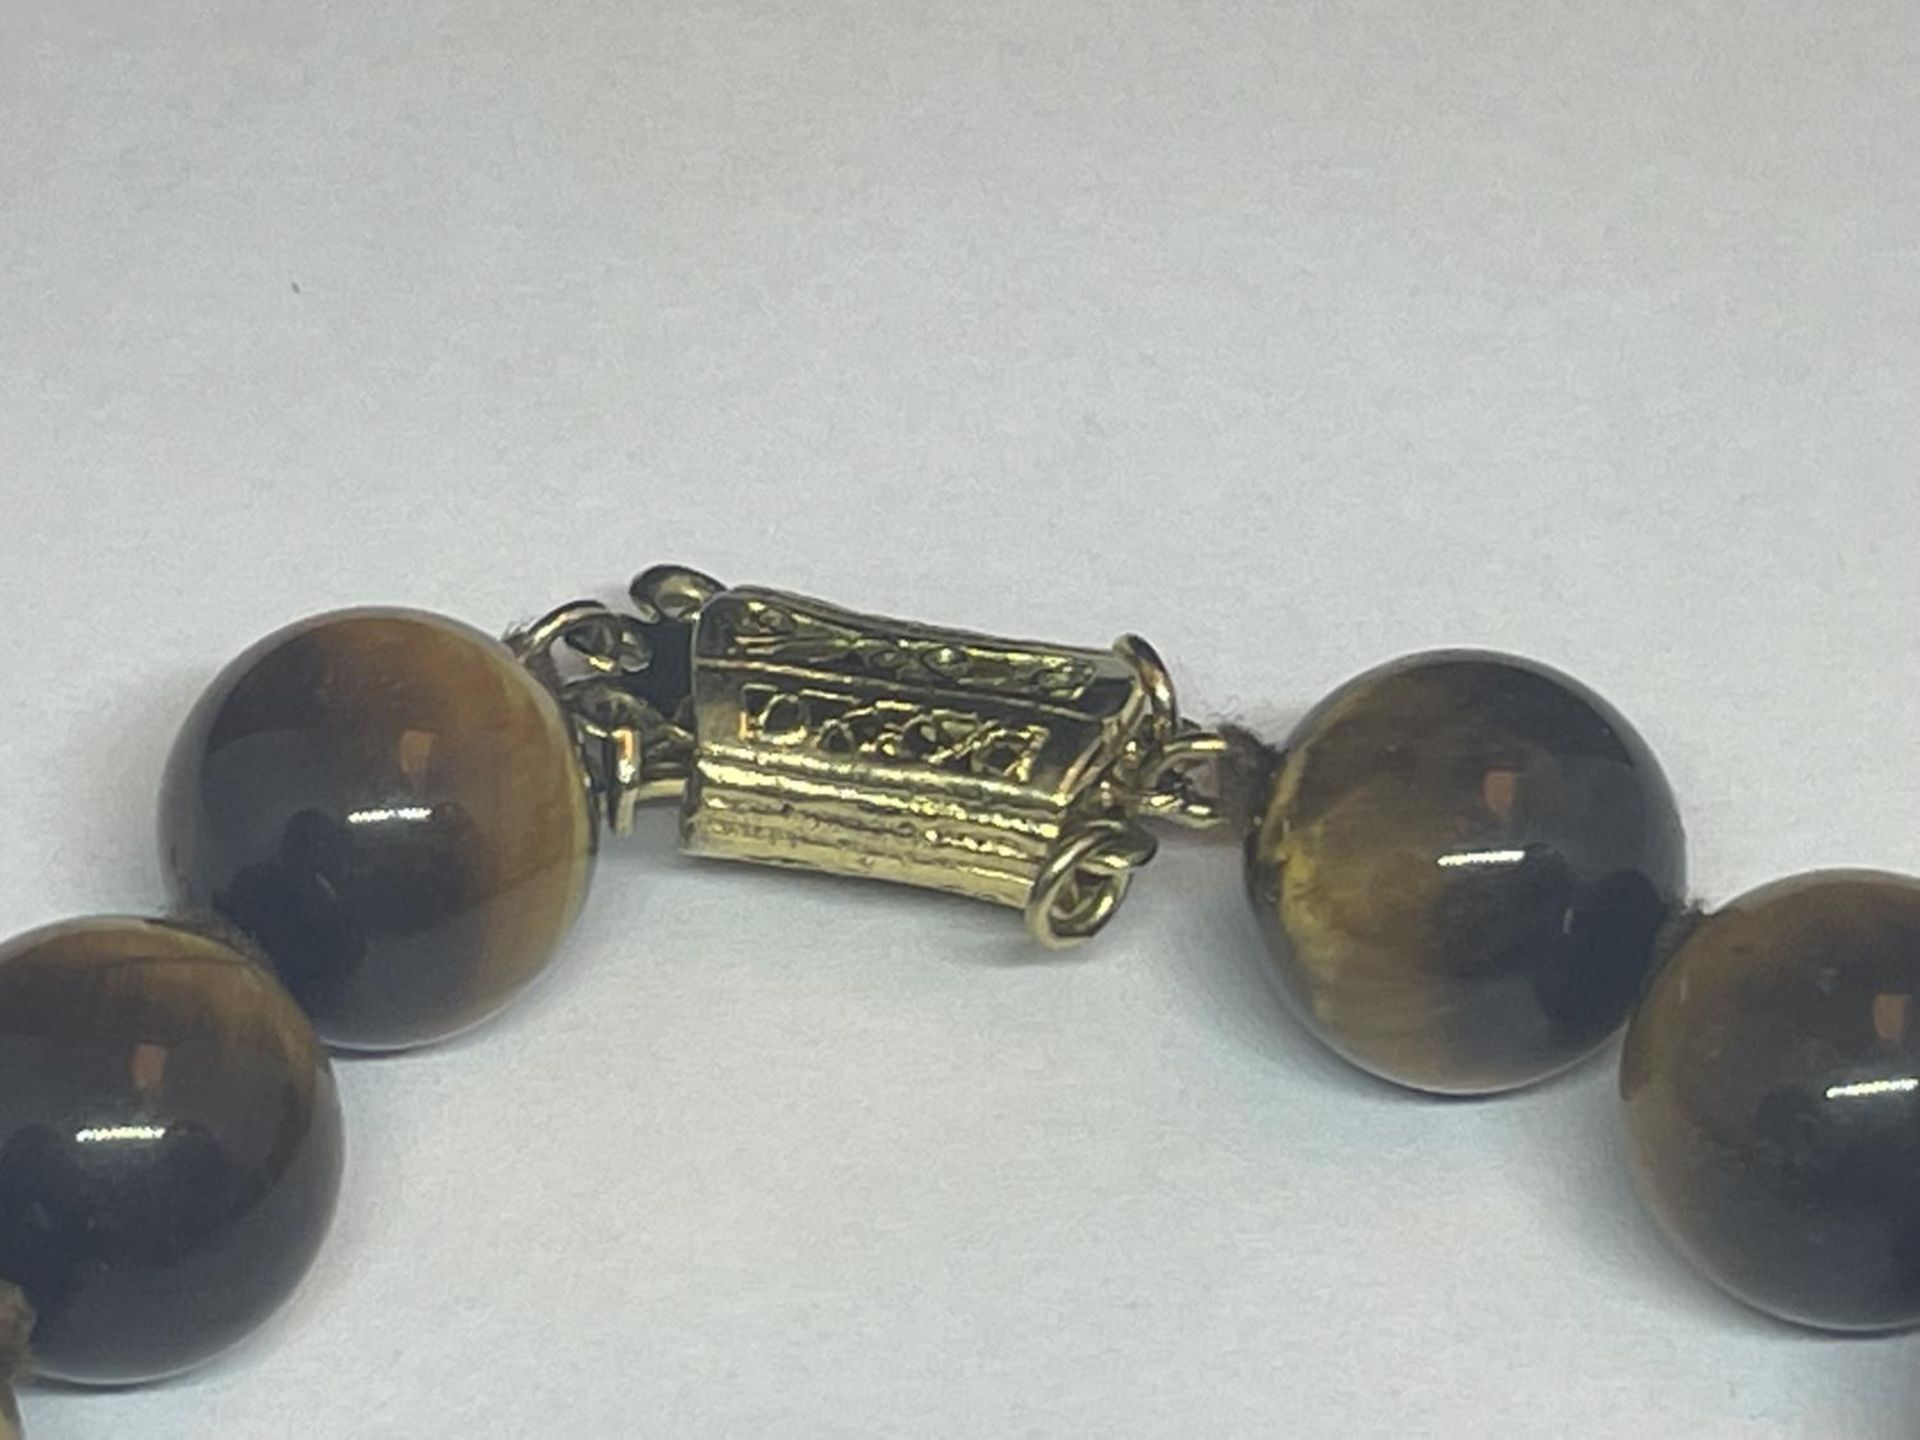 A TIGERS EYE NECKLACE AND A PAIR OF EARRINGS - Image 4 of 4